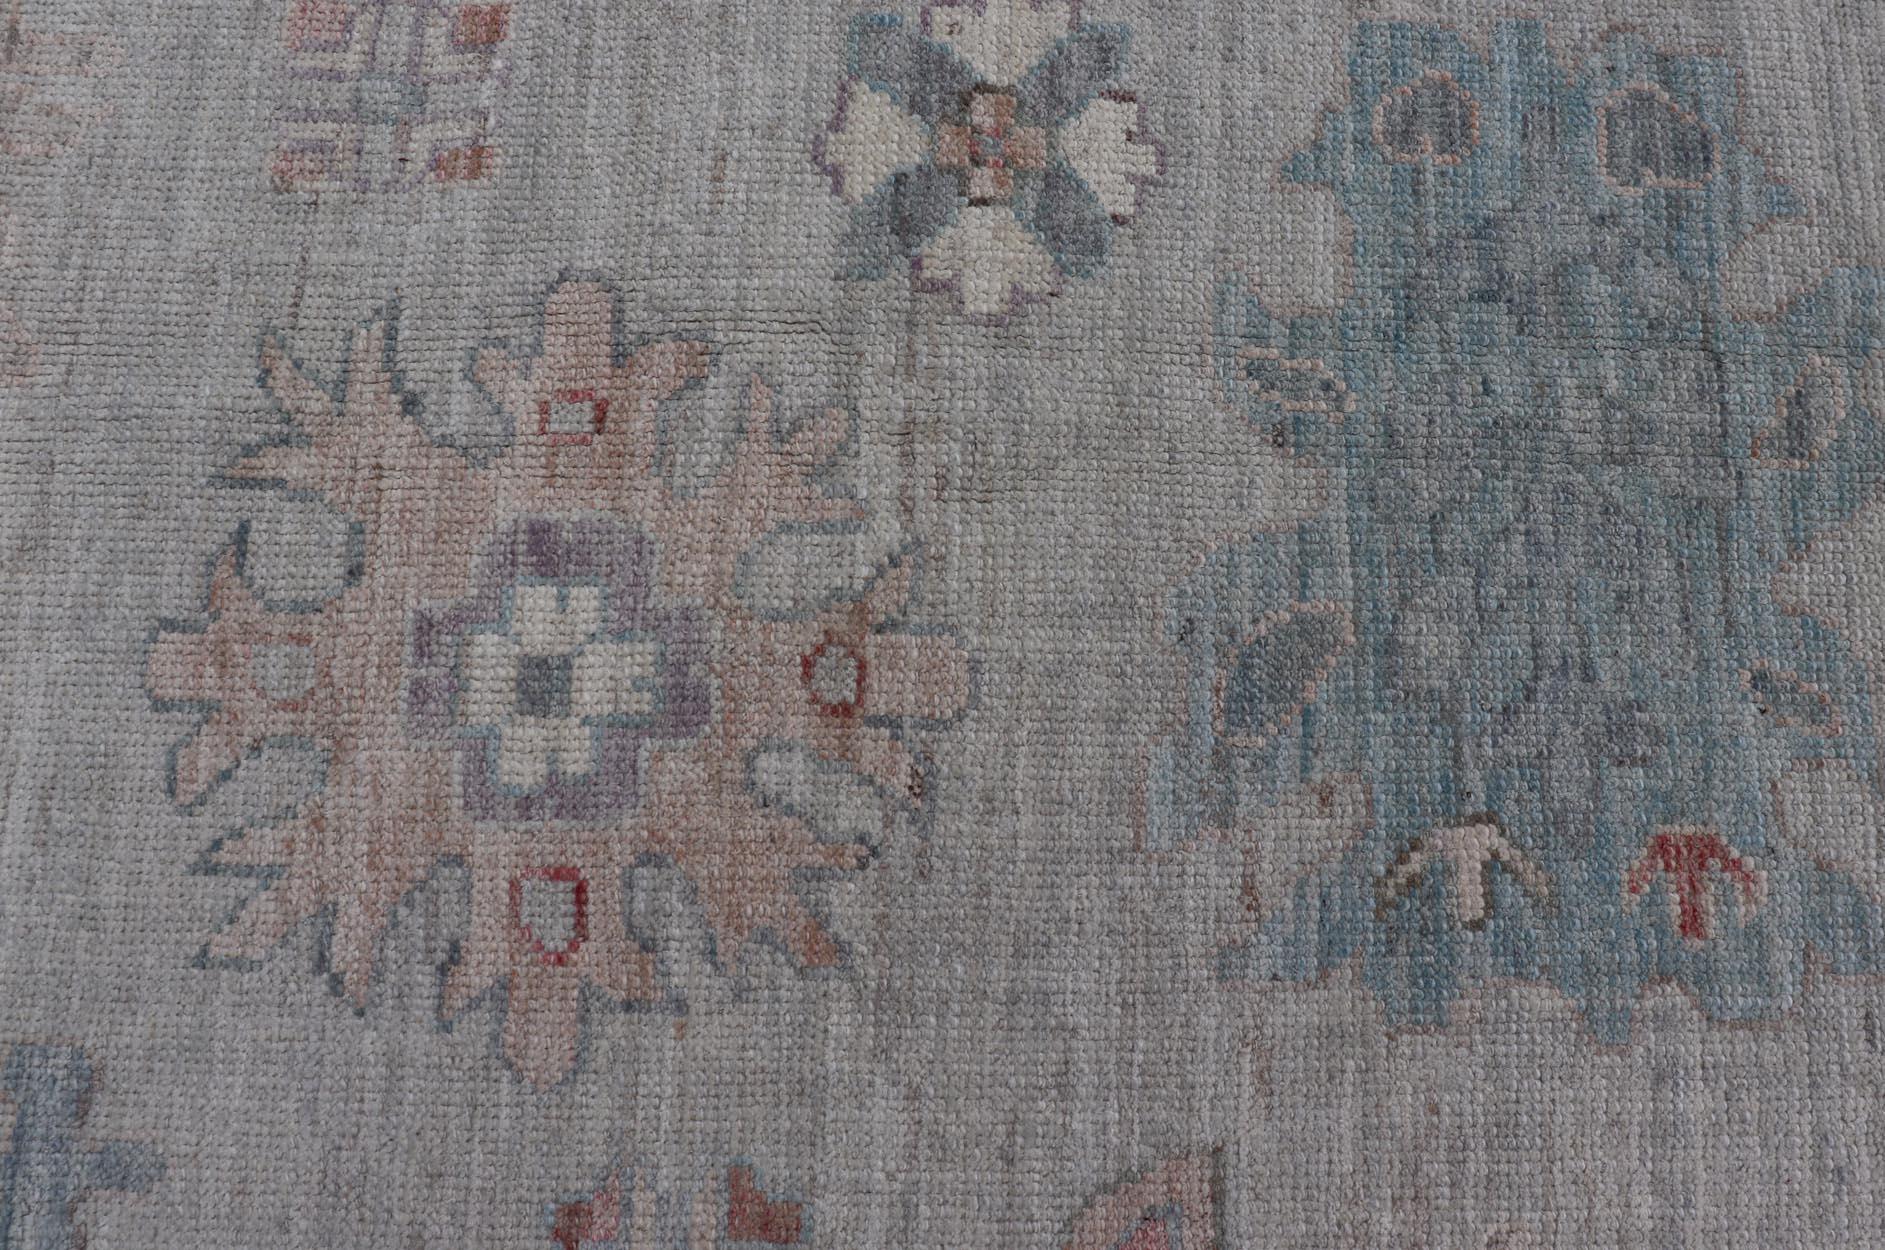 All Over Modern Floral Oushak with A Light Blue-Gray Field and Border
Keivan Woven Arts; rug AWR-8546 Country of Origin: Afghanistan Type: Oushak Design: All-Over, Floral, Arabesque-Floral 21st Century
Measures: 9'11 x 14'0 
This hand-knotted Oushak